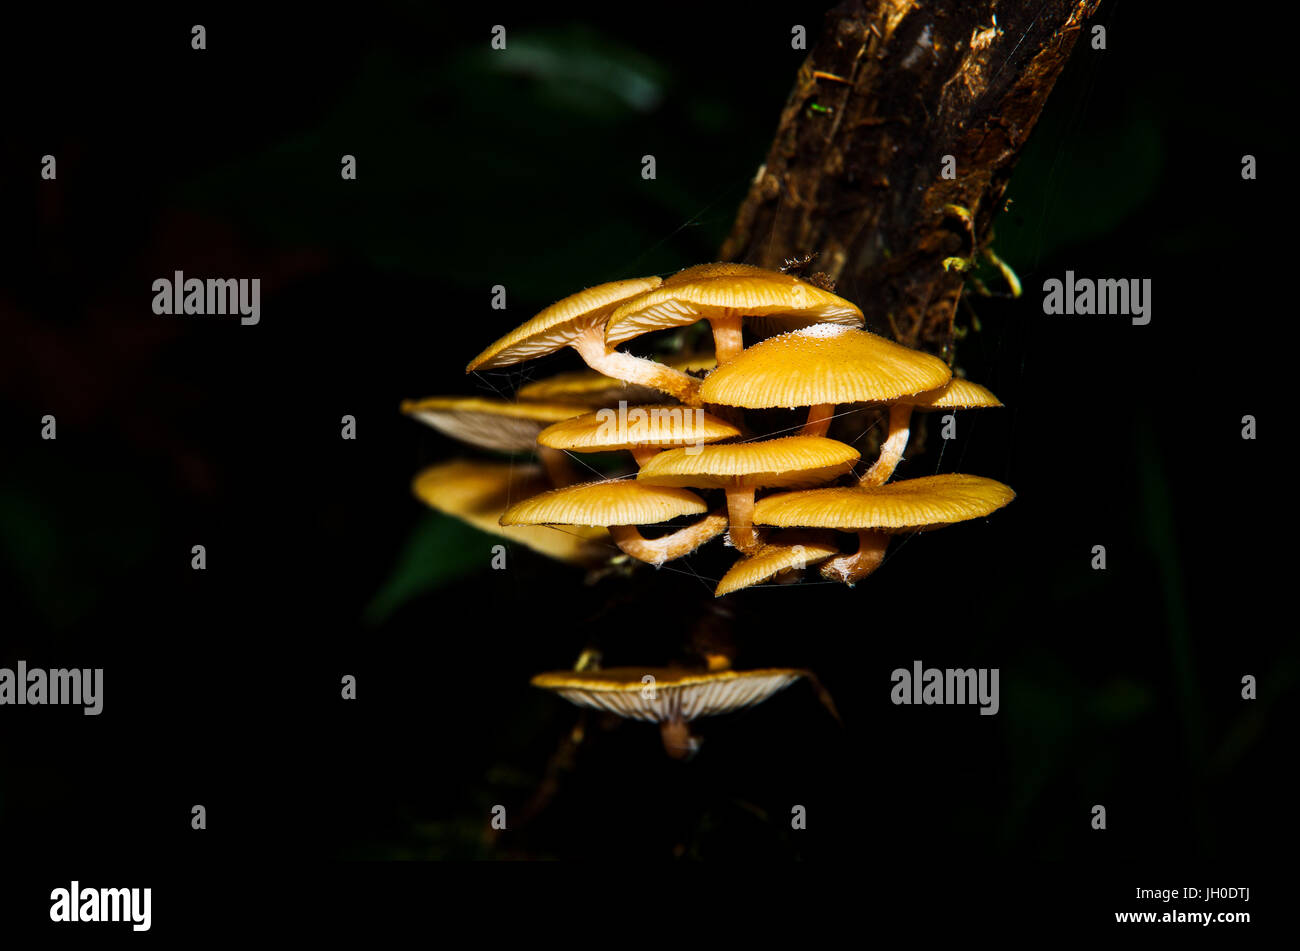 Image of fungi on a tree with dark background in the rain forest Stock Photo